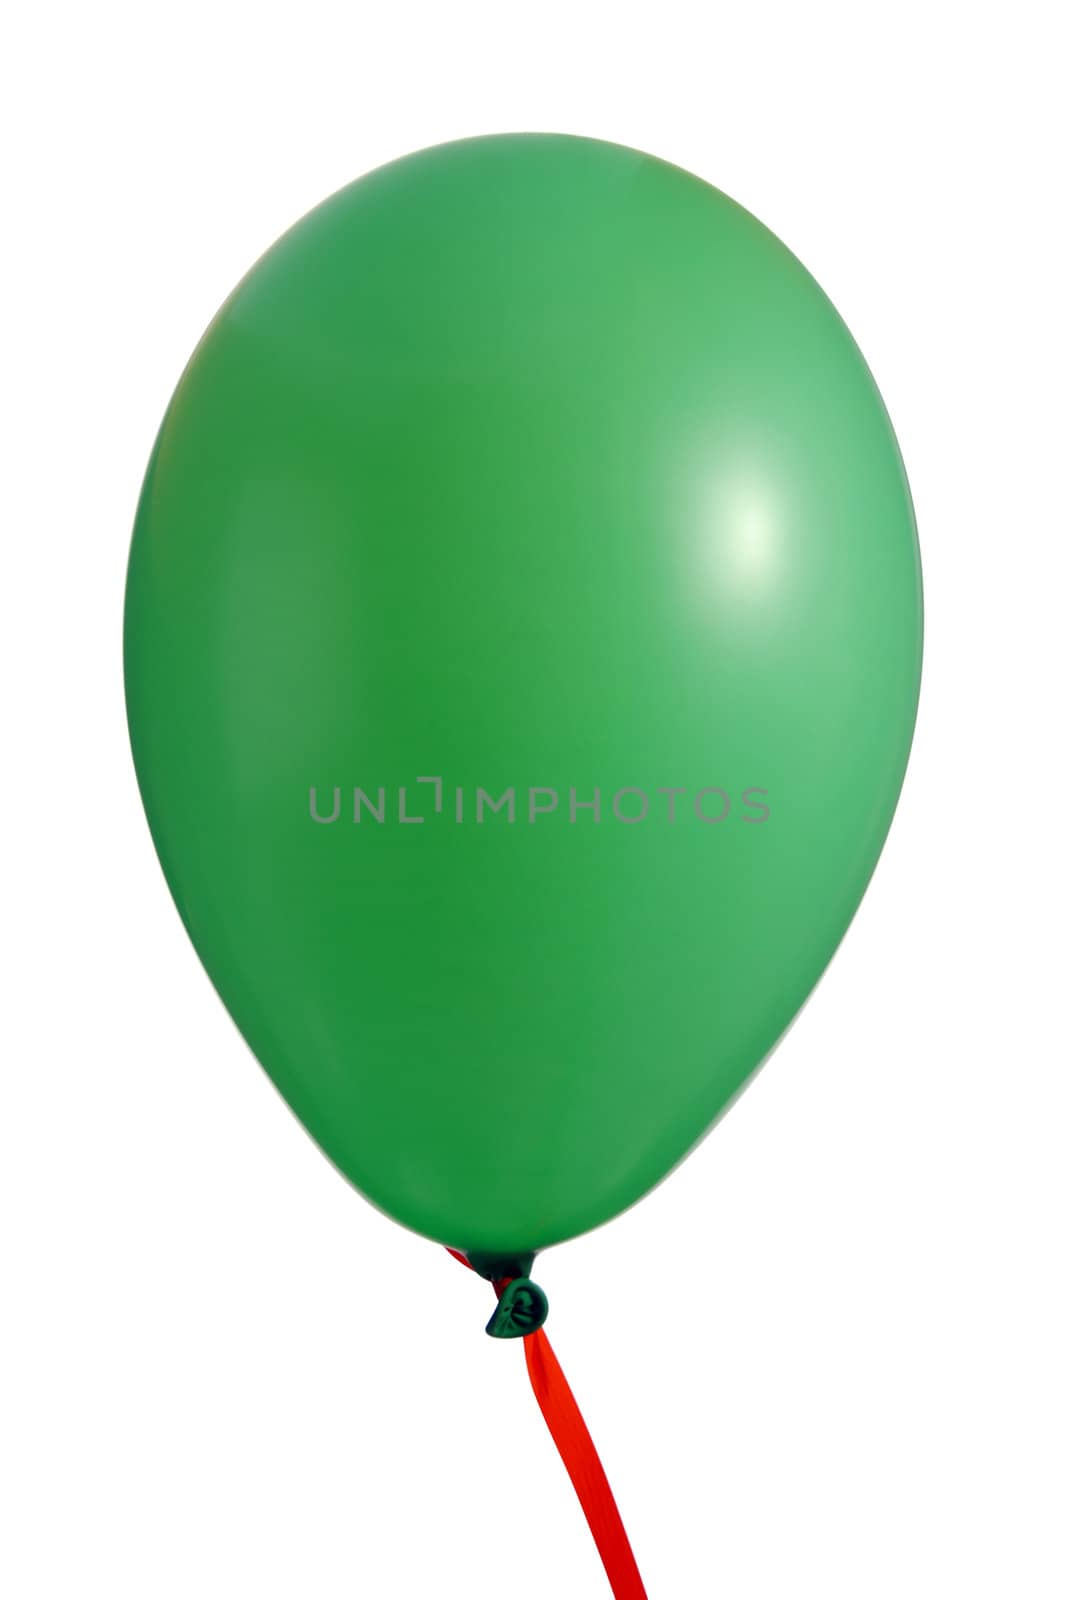 Green balloon isolated on white backgrond